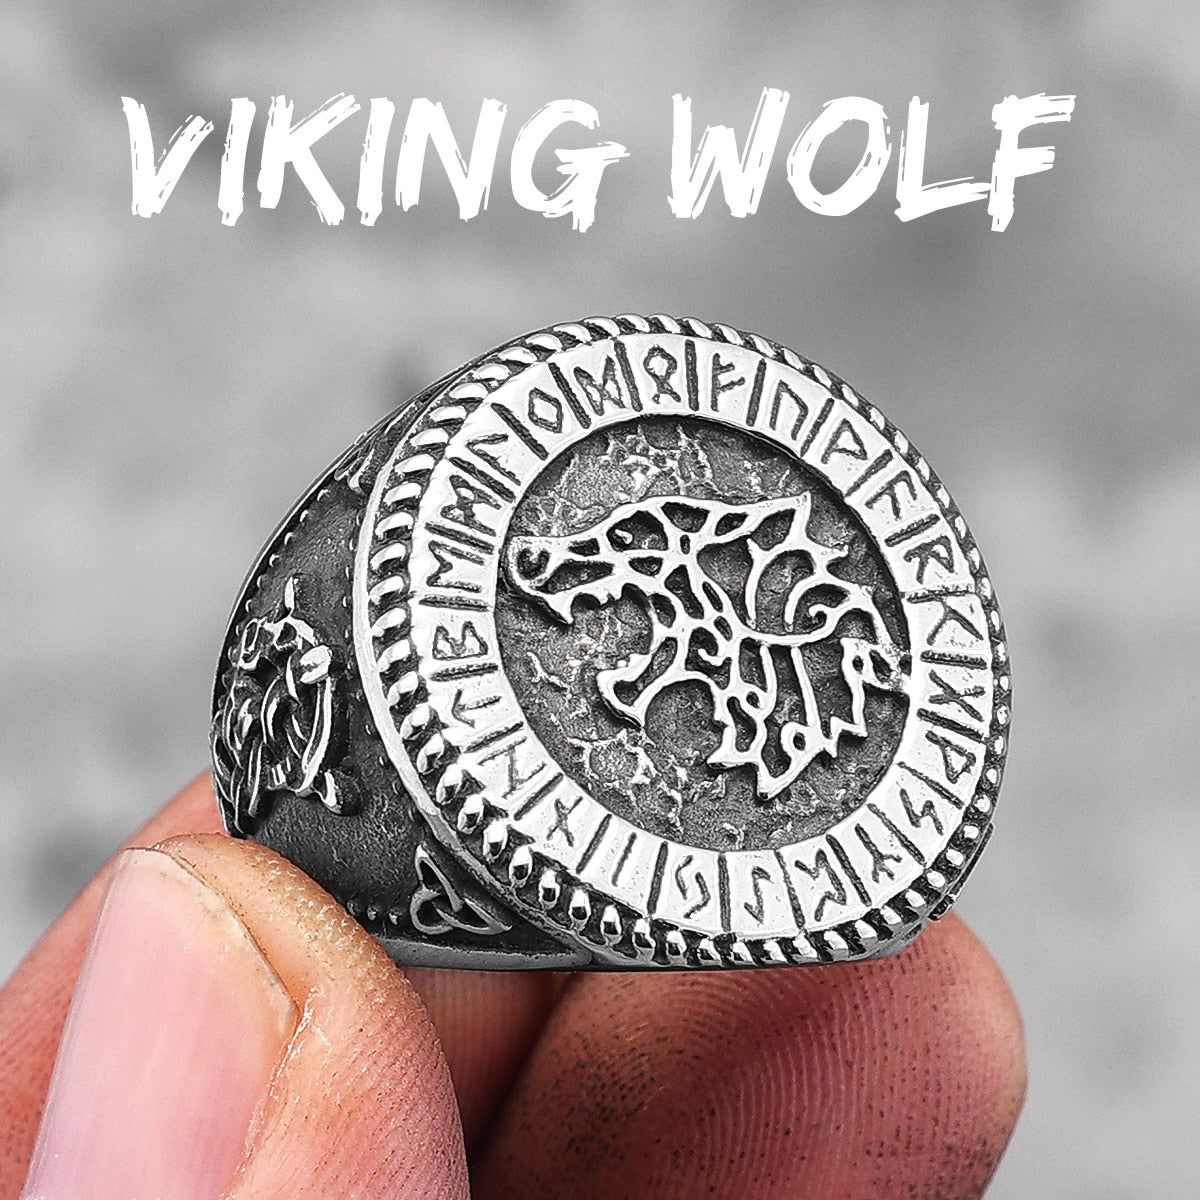 Nordic Viking Wolf Stainless Steel Mens Rings Unique Punk Amulet for Male Boyfriend Biker Jewelry Creativity Gift R773-Viking Wolf